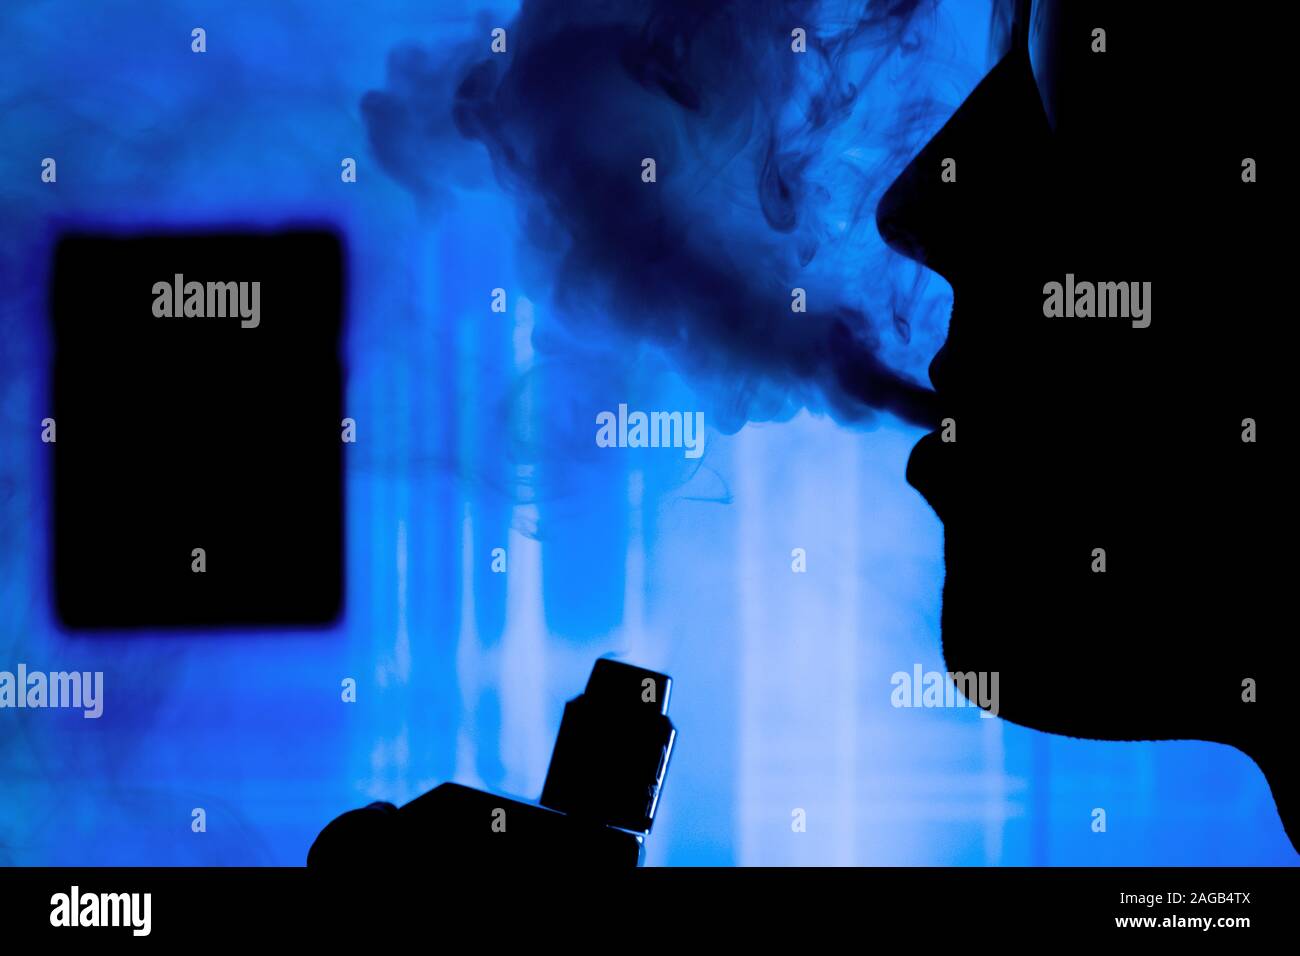 Man with electronic cigarette and smoke vapping with neon lights background help quit smoking tobacco Stock Photo